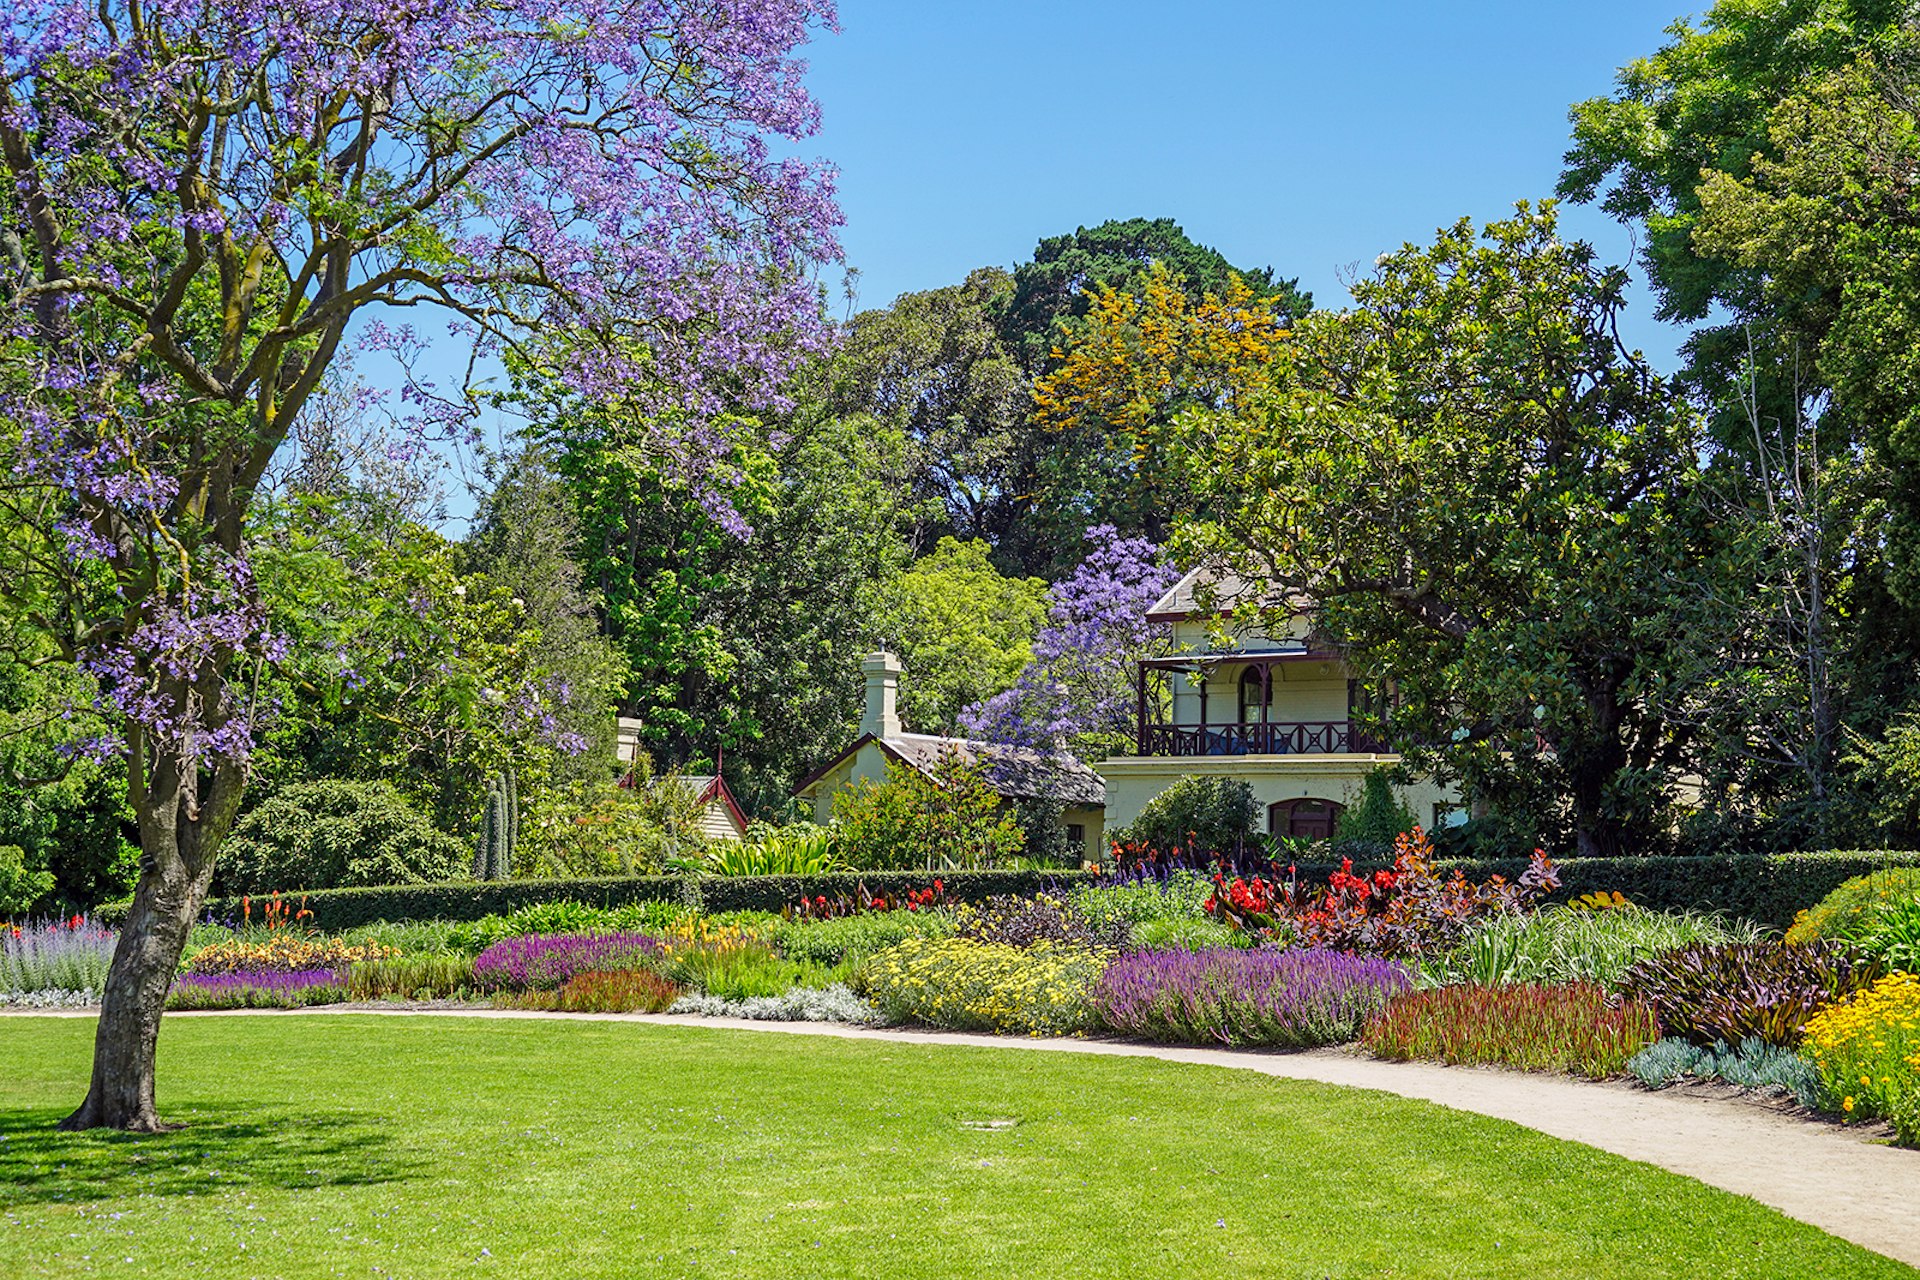 An image of a curated garden with flowering shrubs and a blooming tree in the Royal Botanic Gardens, Melbourne.